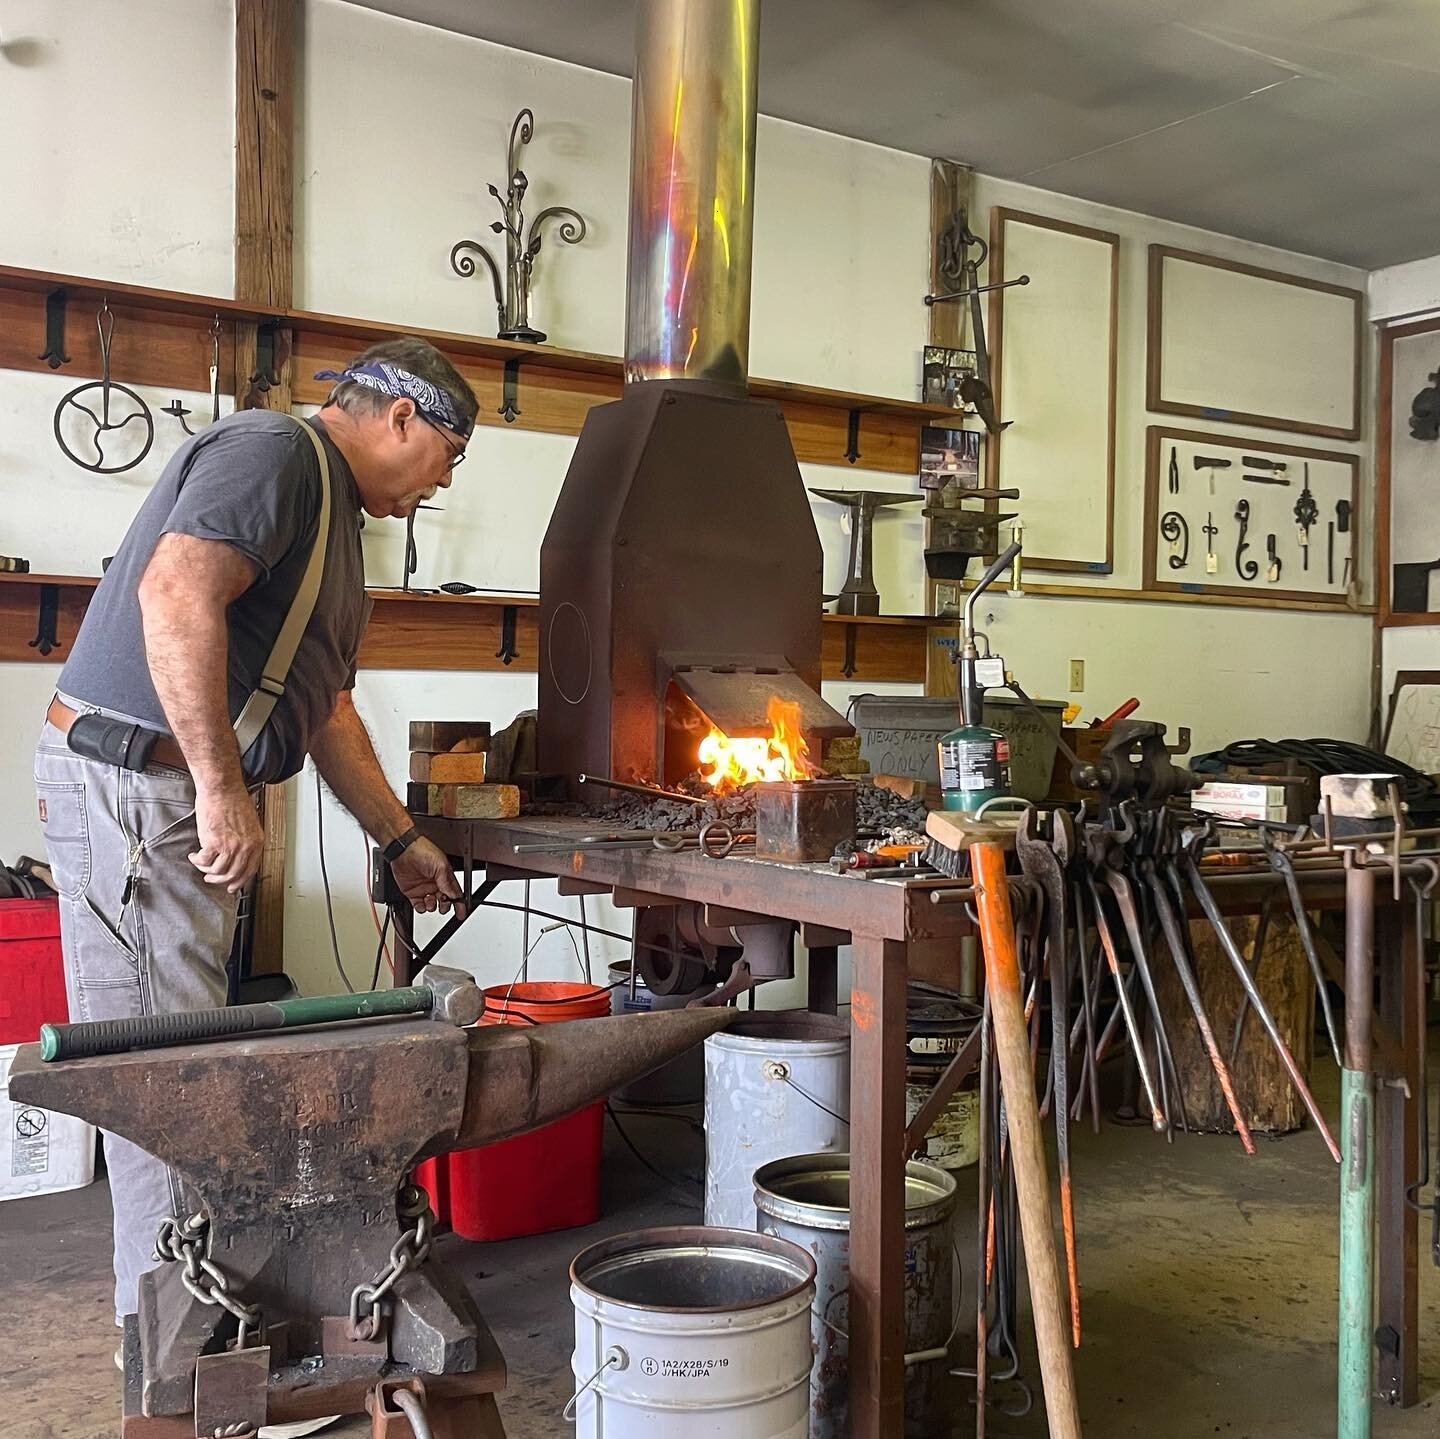 Today we had a field trip to visit Brian Thompson, President of Southern Ohio Forge &amp; Anvil. He demonstrated lots of blacksmithing techniques, different kinds of hammers, and crafted a truly beautiful fire poker we&rsquo;ll be using on our campin